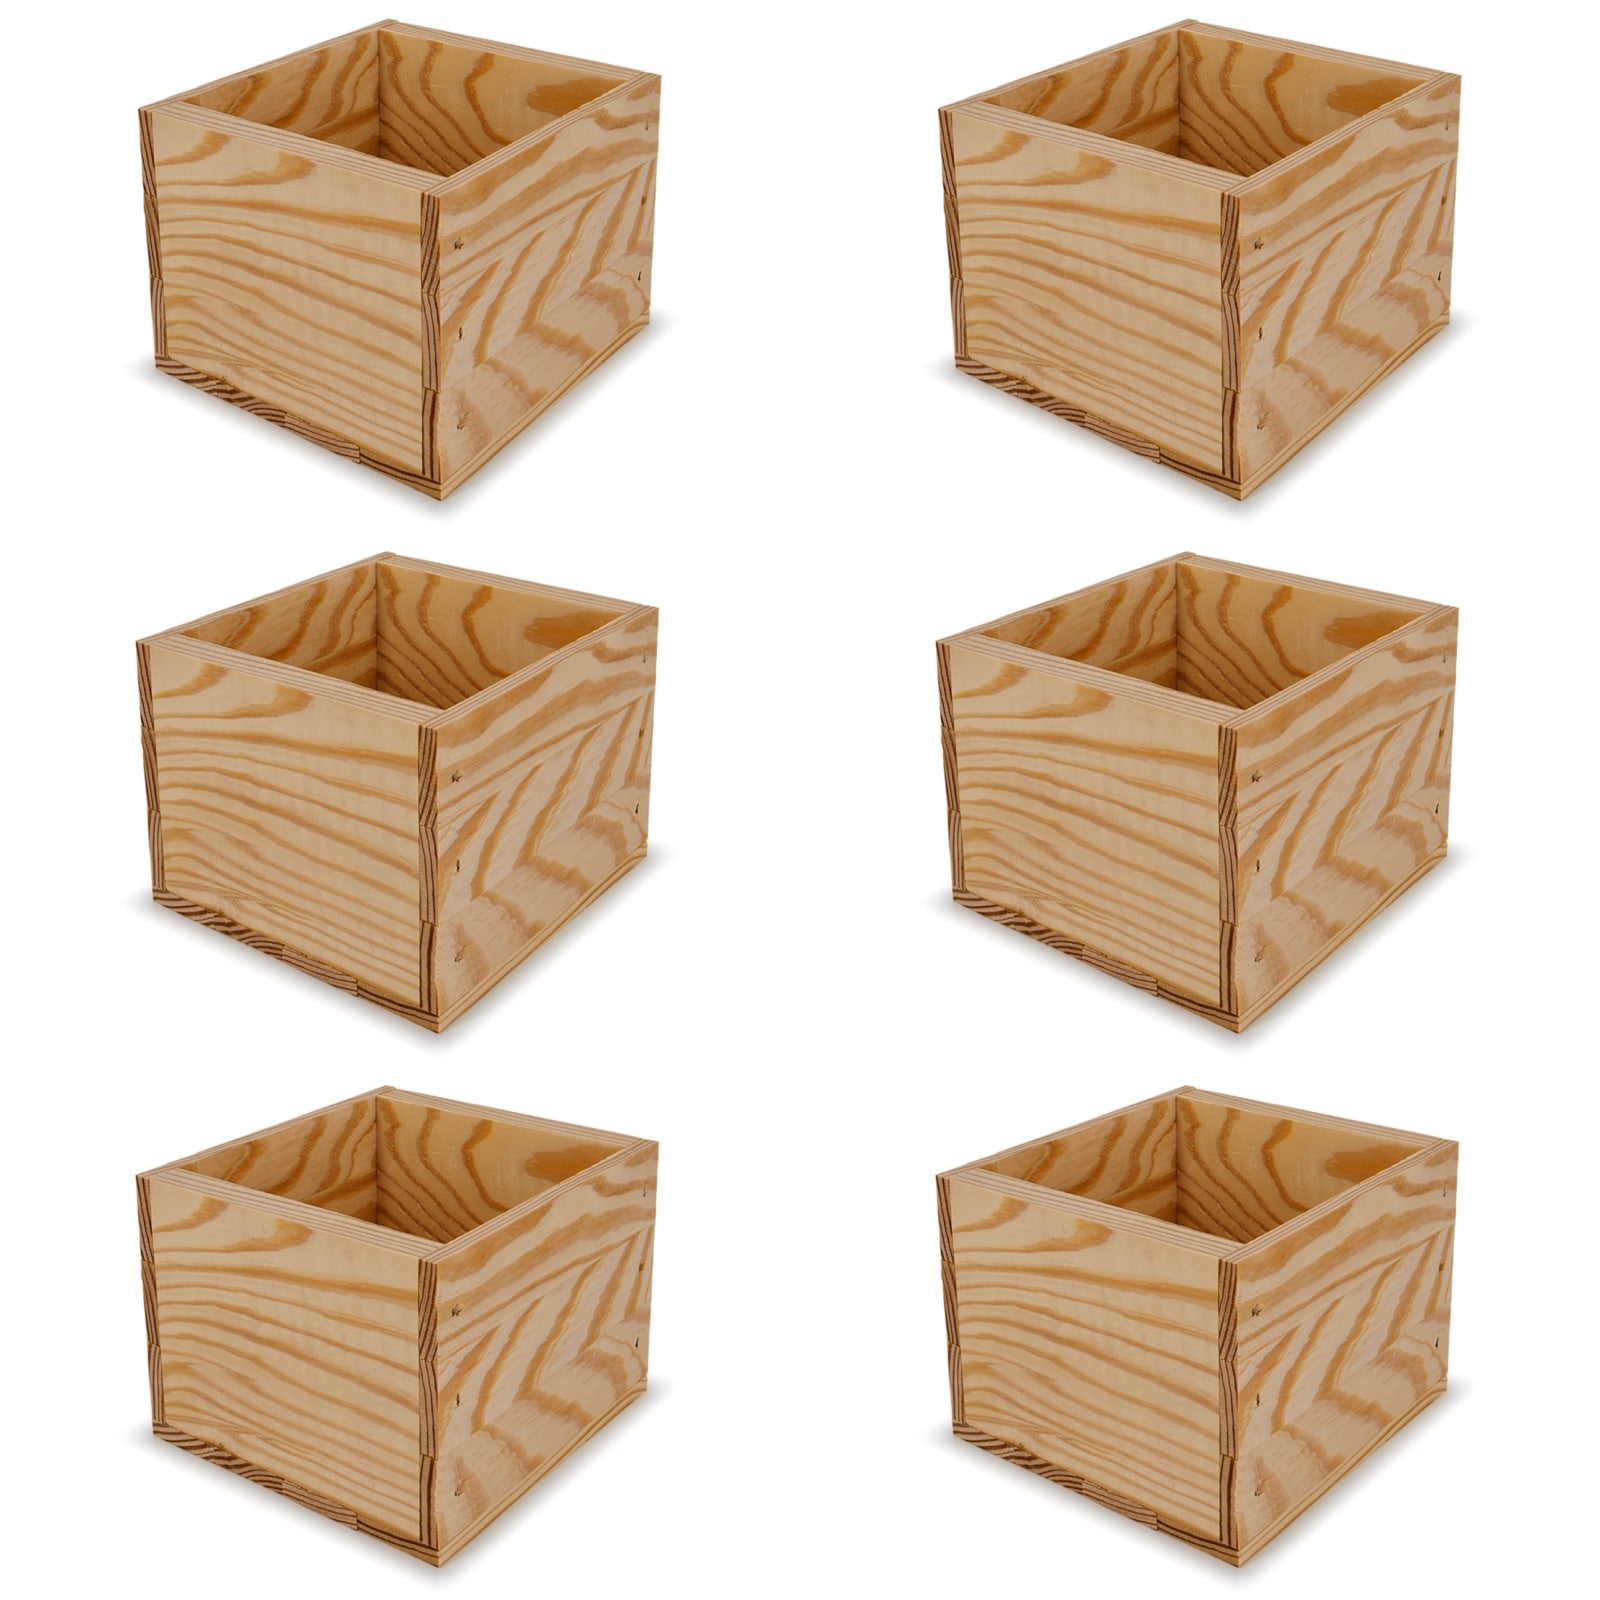 6 Small wooden crates 6x6.25x5.25